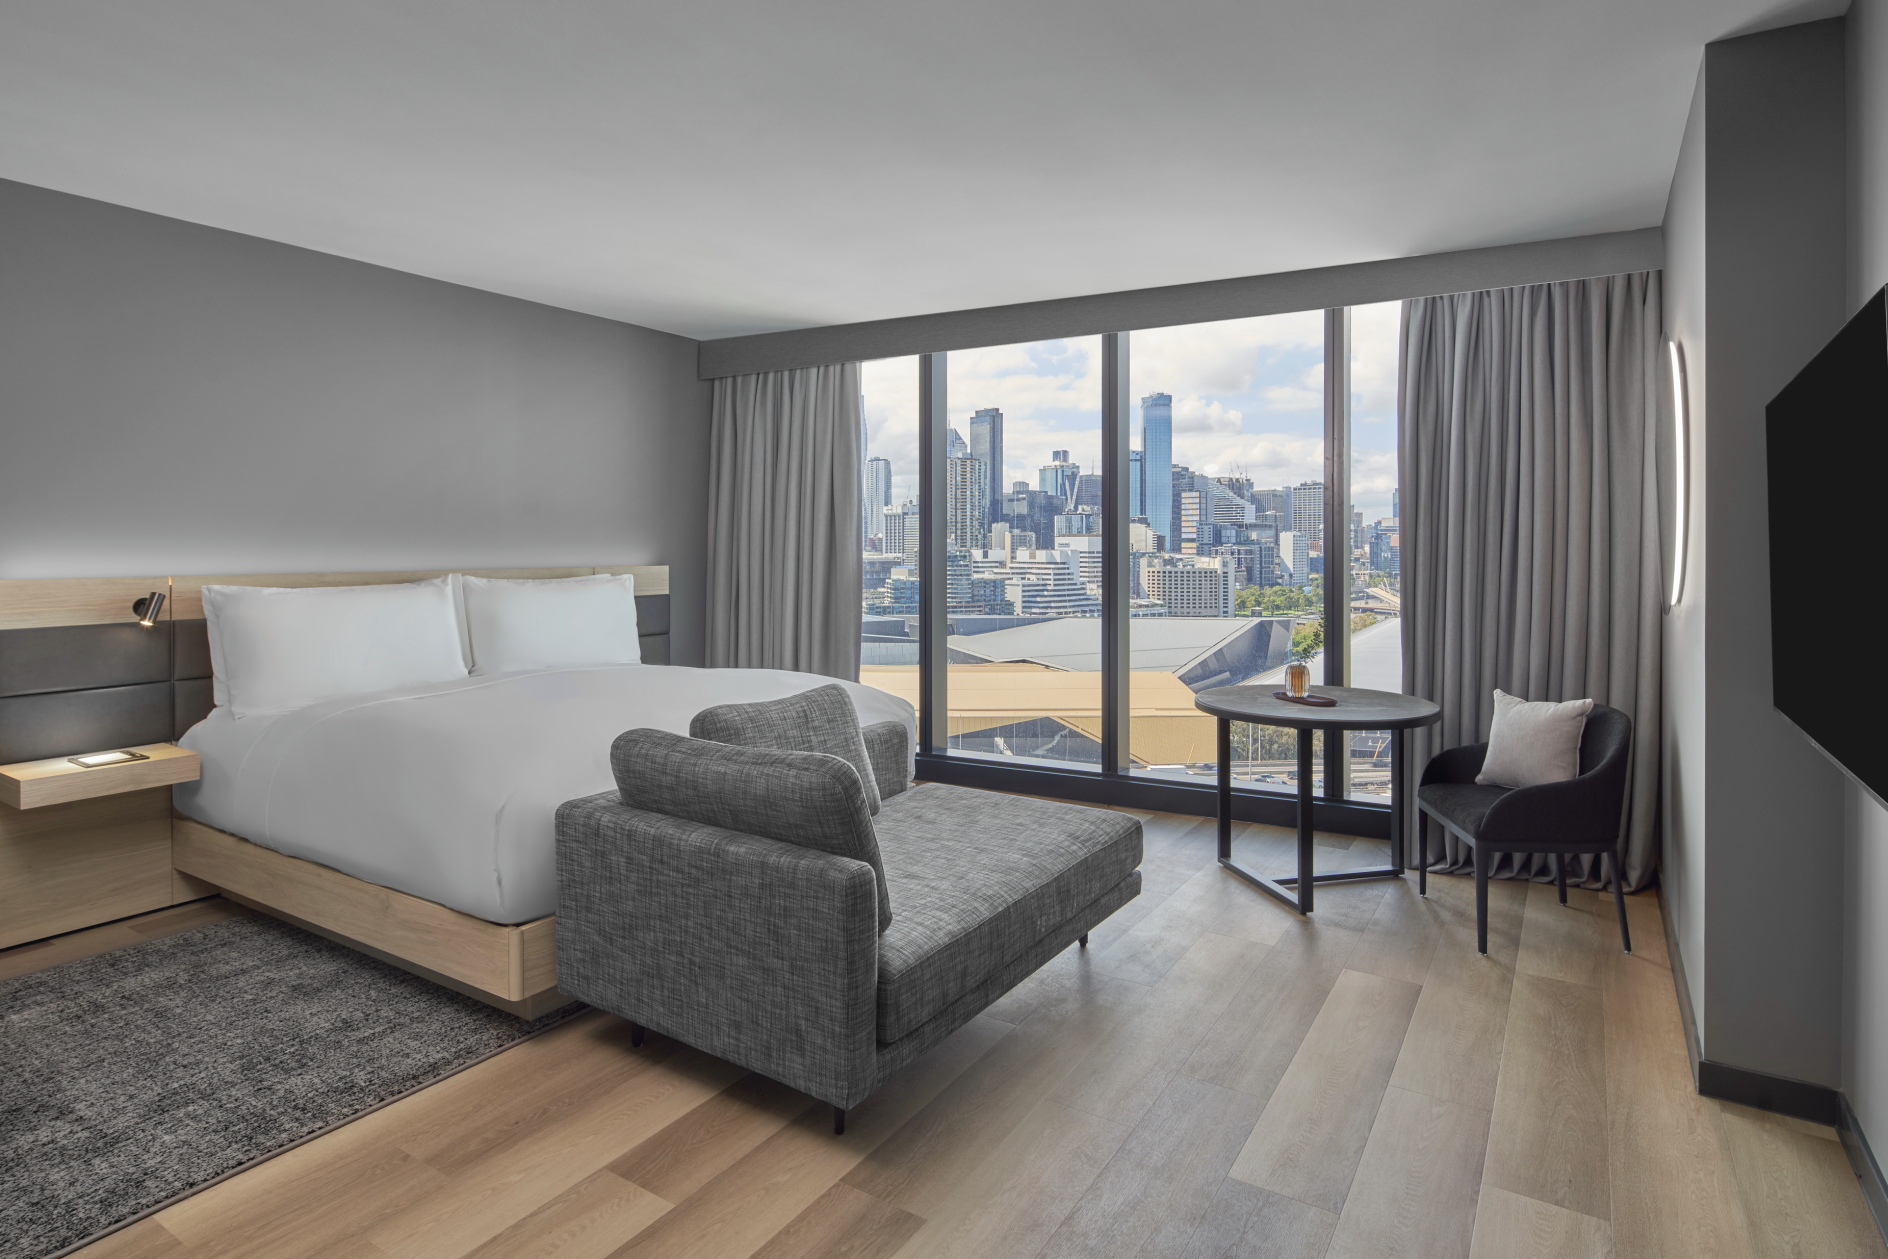 Deluxe Room at AC Hotel by Marriott Melbourne Southbank. Click to enlarge.